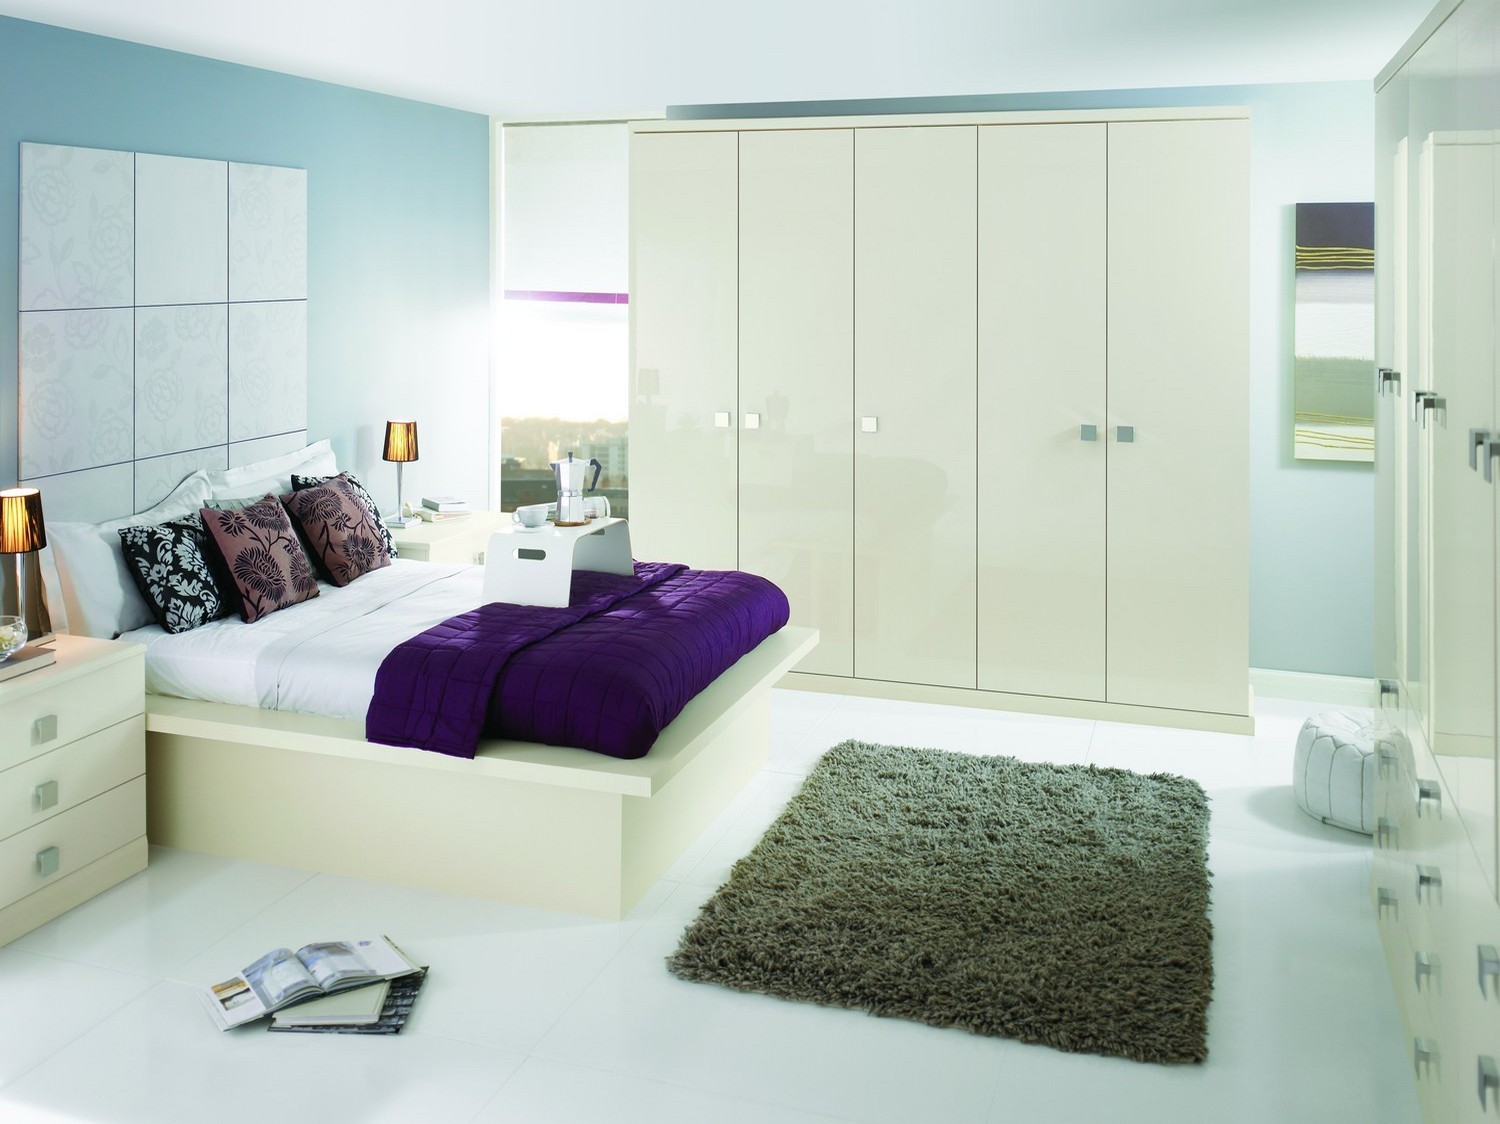 A modern gloss fitted bedroom furniture set finished in Oyster gloss with a modern square chrome handle. The bedroom set features a range of wardrobes and drawers, bed side cabinets and matching bed. This bedroom has added plenty of storage space to this medium sized bedroom, giving plenty of space for the home owners clothes and belongings.